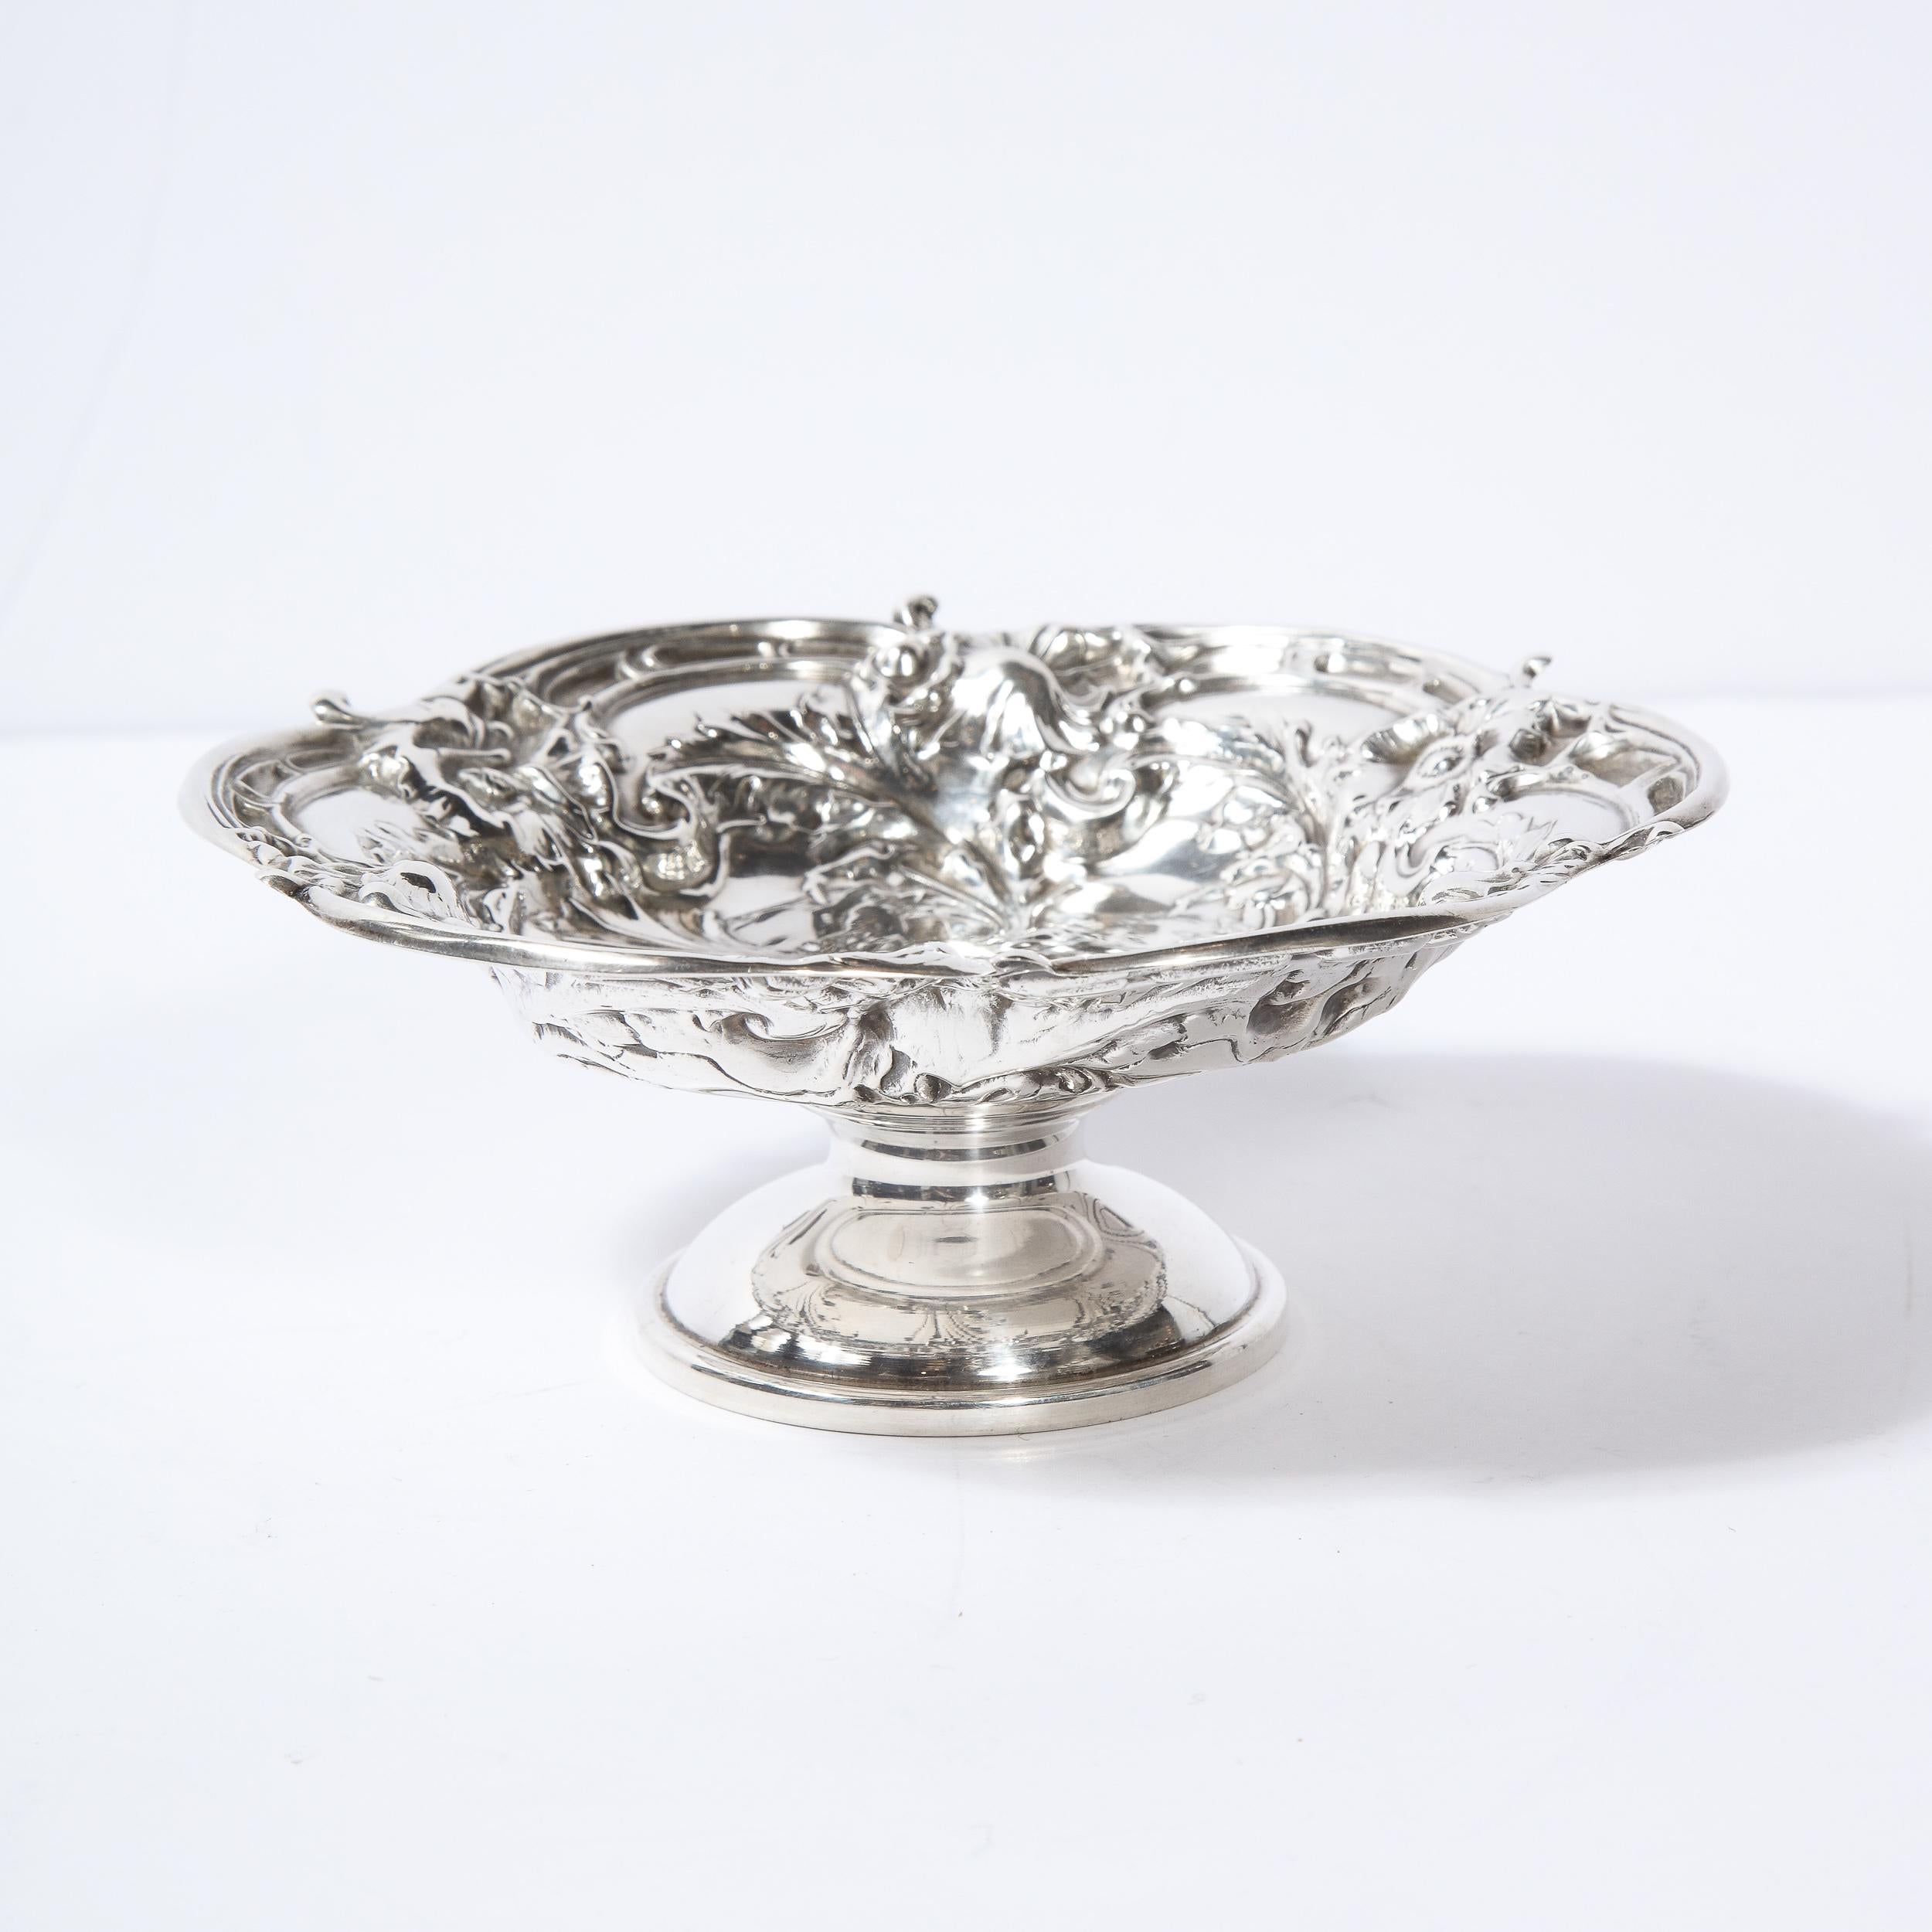 Neoclassical Style Sterling Silver Tazza with Foliate Motifs by Reed and Barton For Sale 3